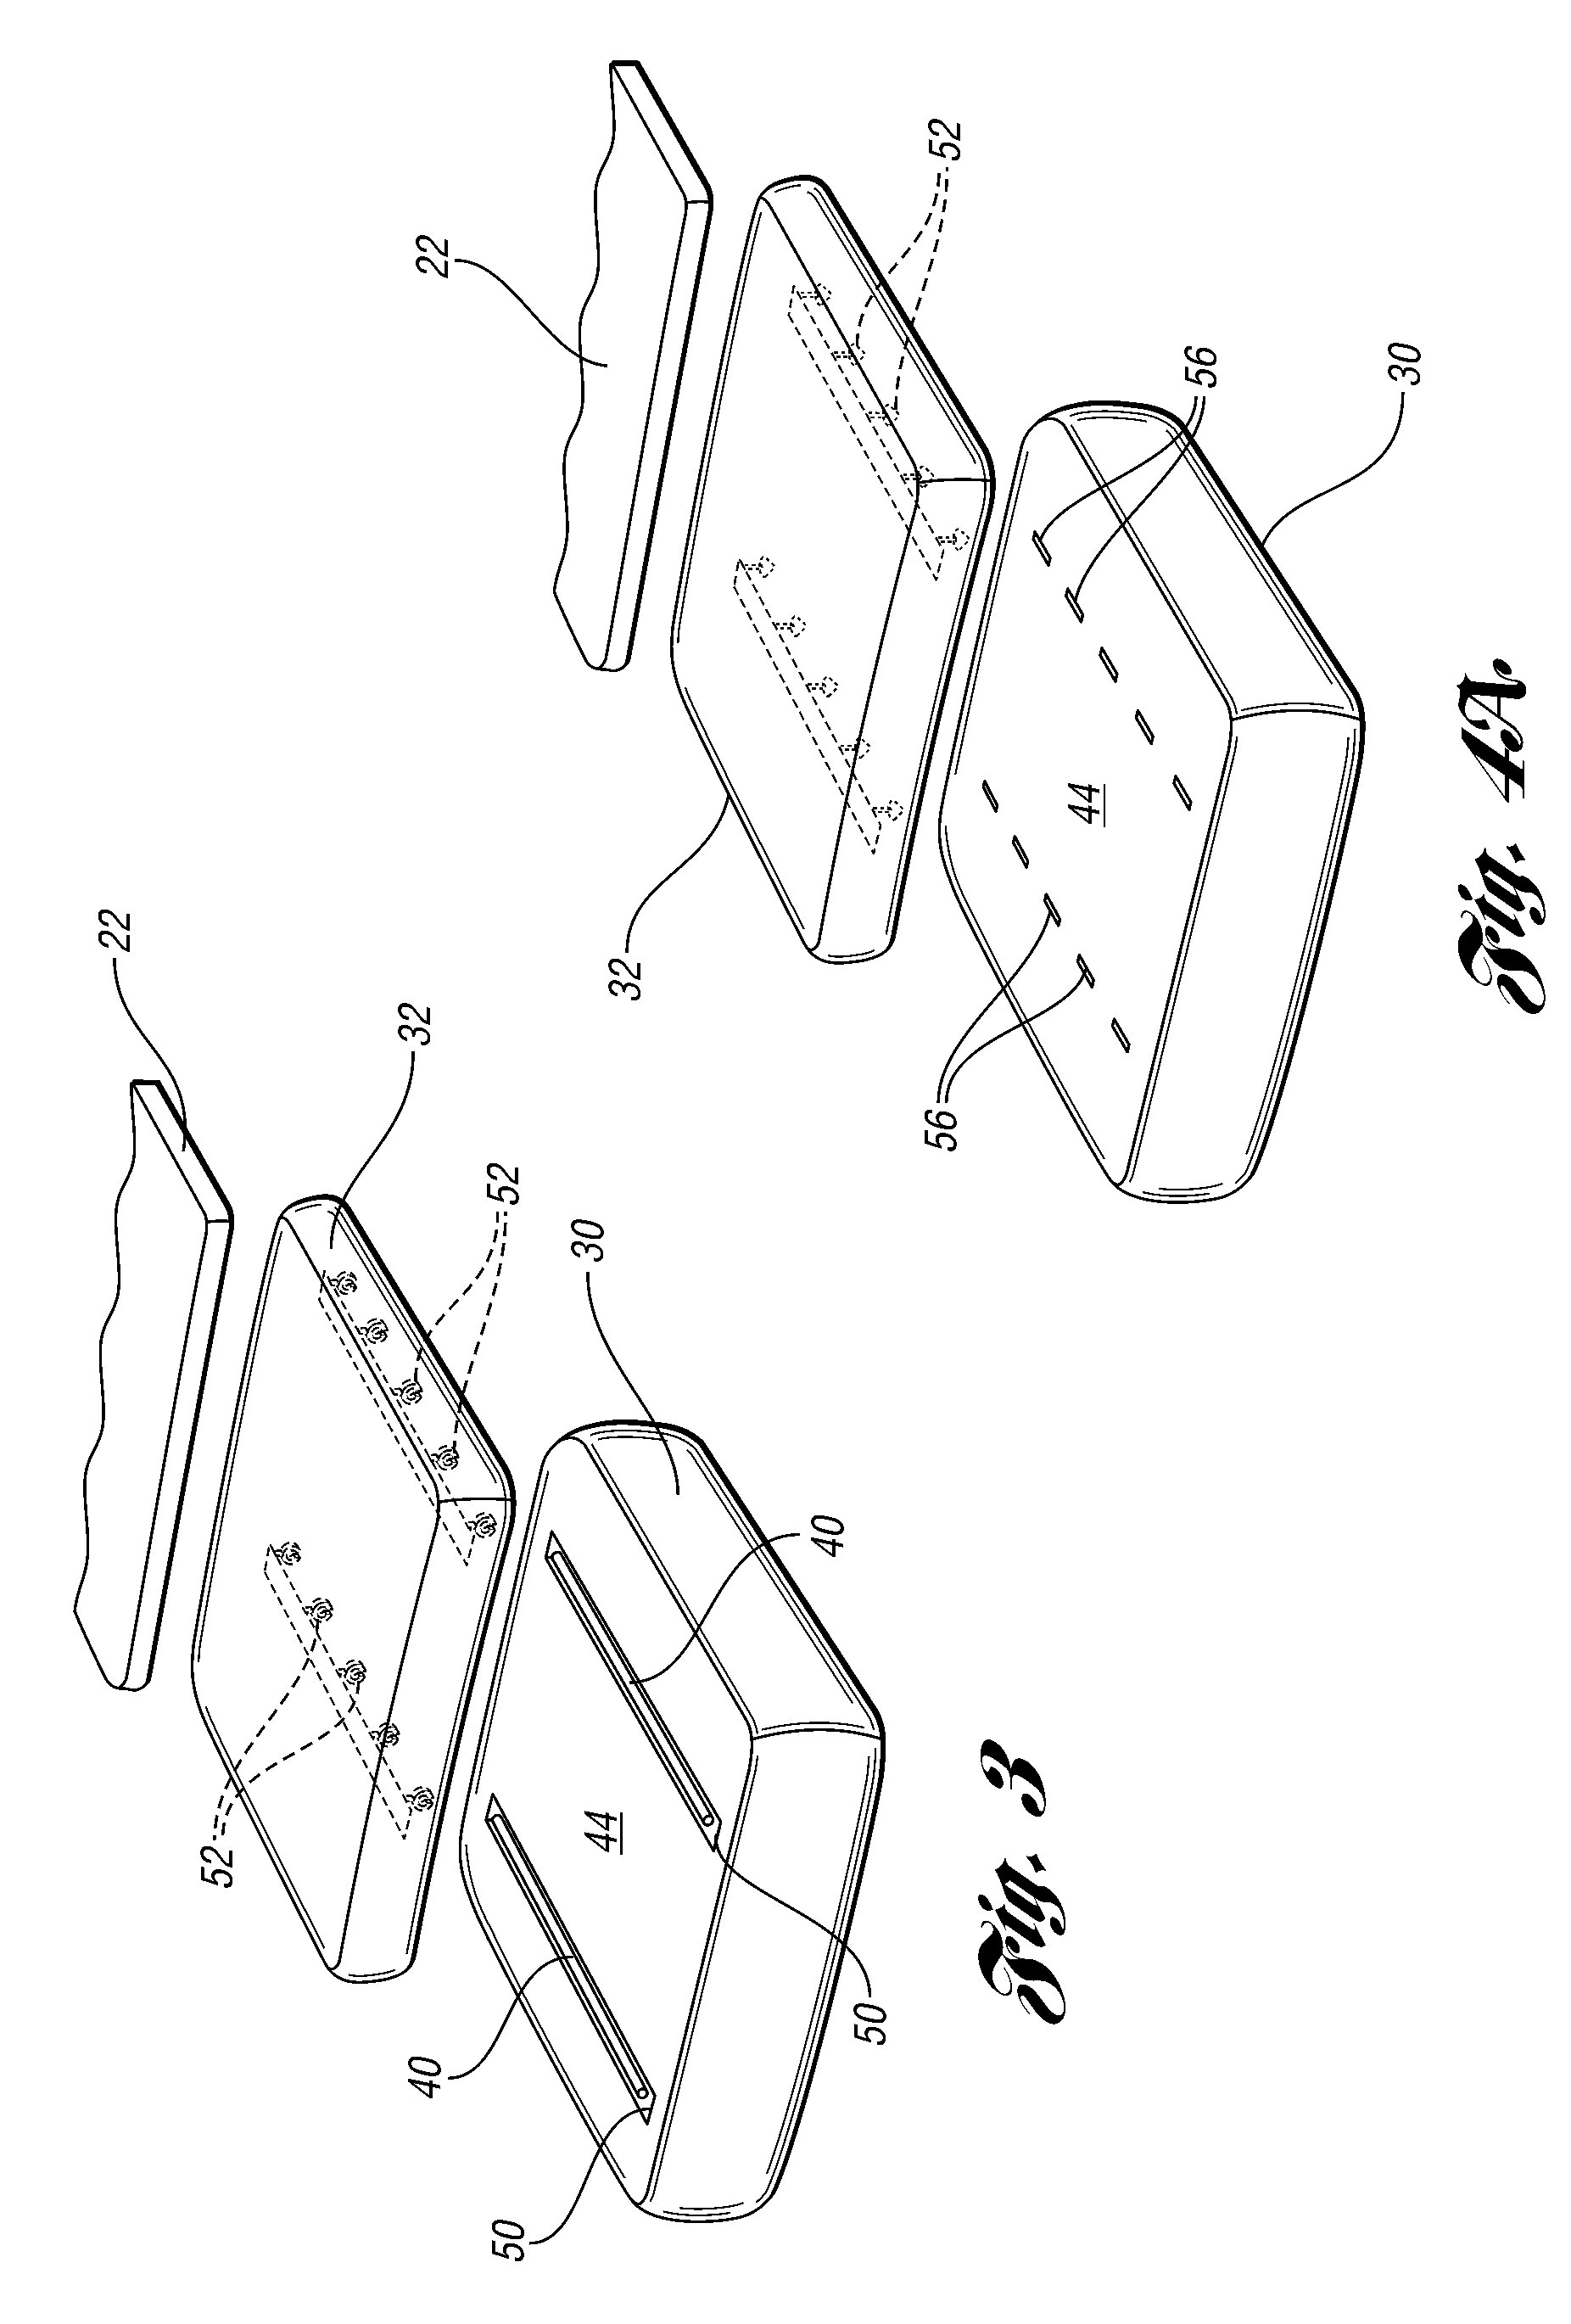 Vehicle seat assembly having layered seating system with attachment member